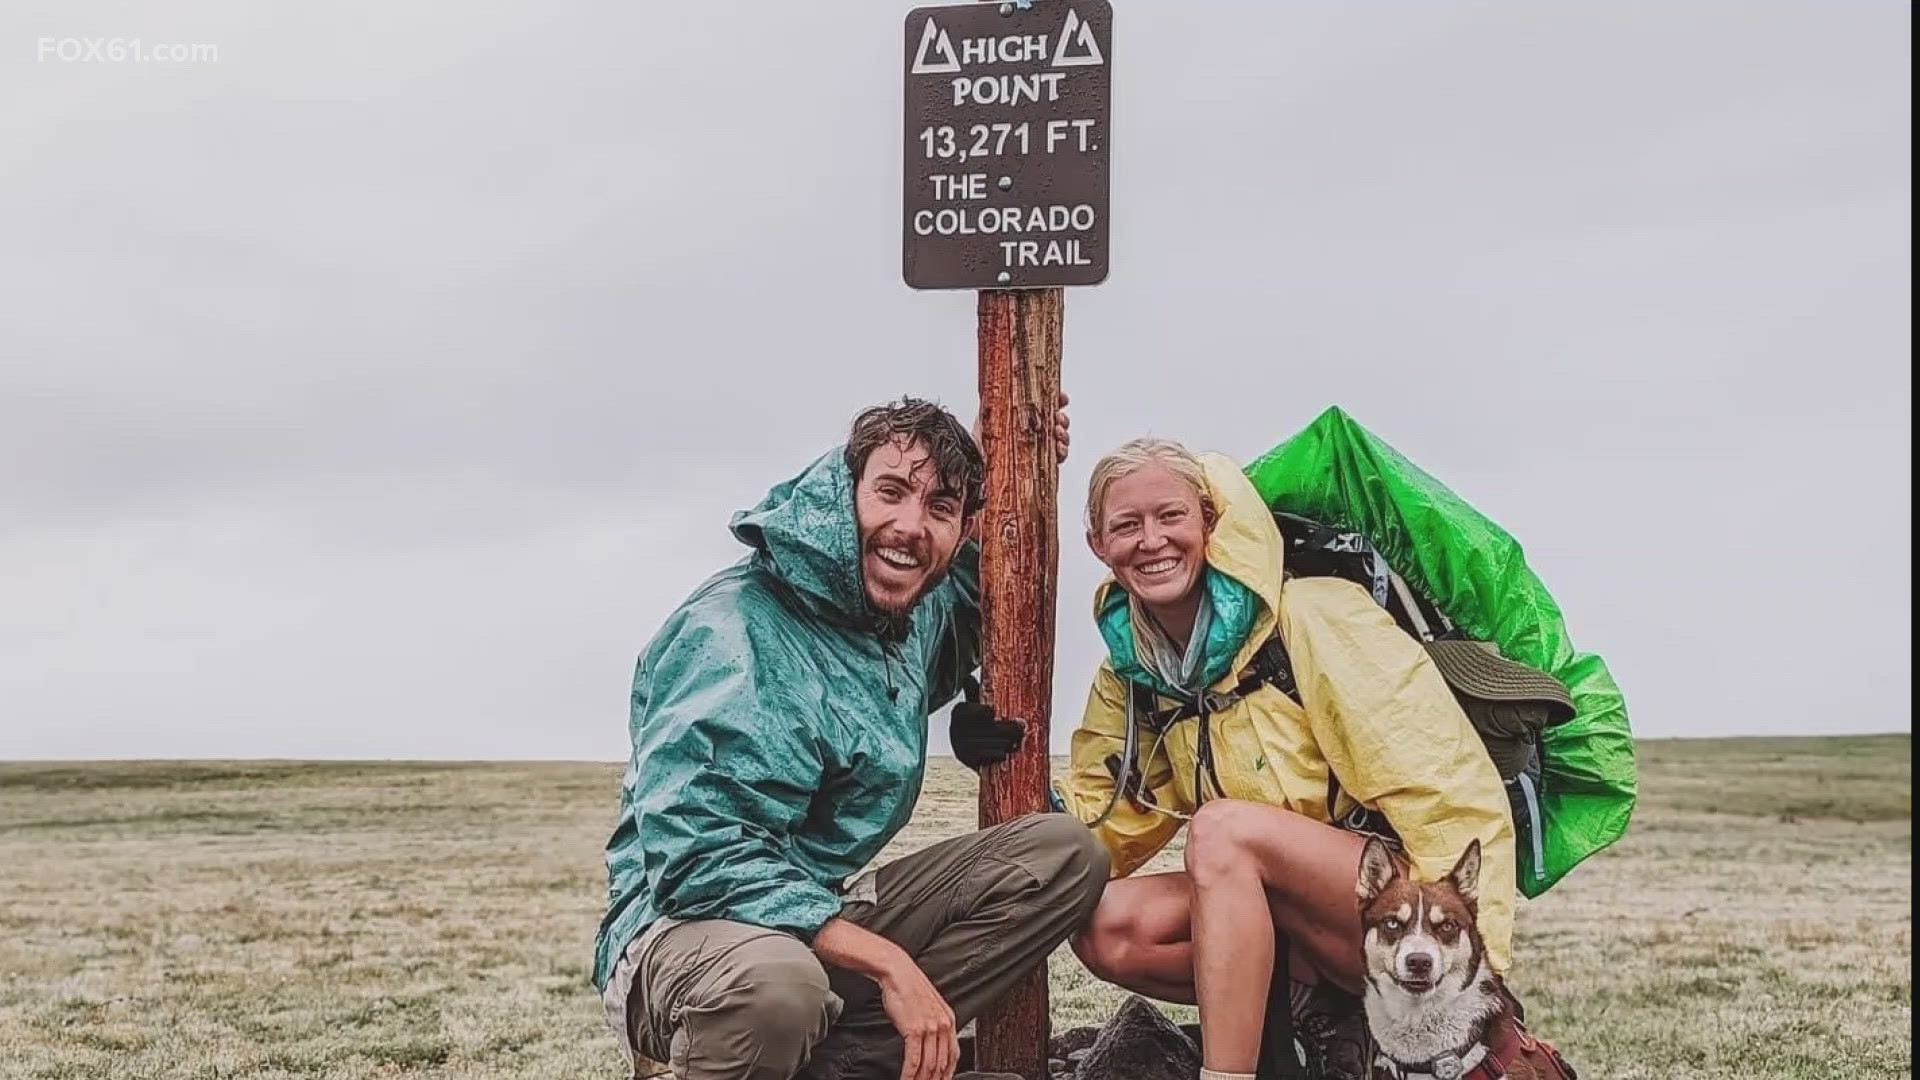 Matt and Grace Grooms, along with their two dogs Foxy and Nemo are walking the East Coast Greenway from Calais, Maine to Key West, Florida.